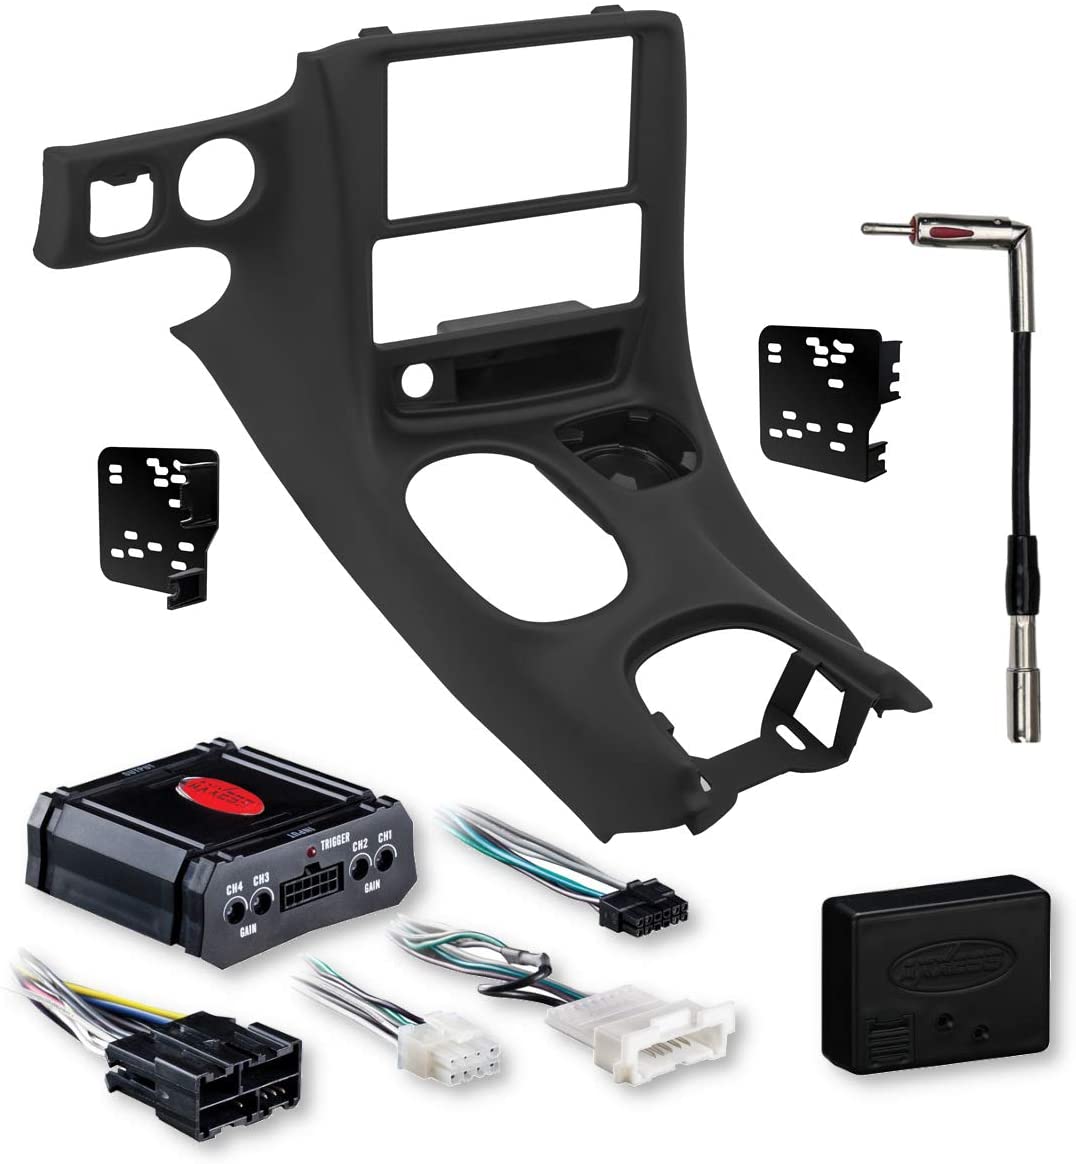 Metra DP-3021B Compatible with Chevy Corvette 1997 1998 1999 2000 2001 2002 2003 2004 Double DIN Stereo Harness Radio Install Dash Kit